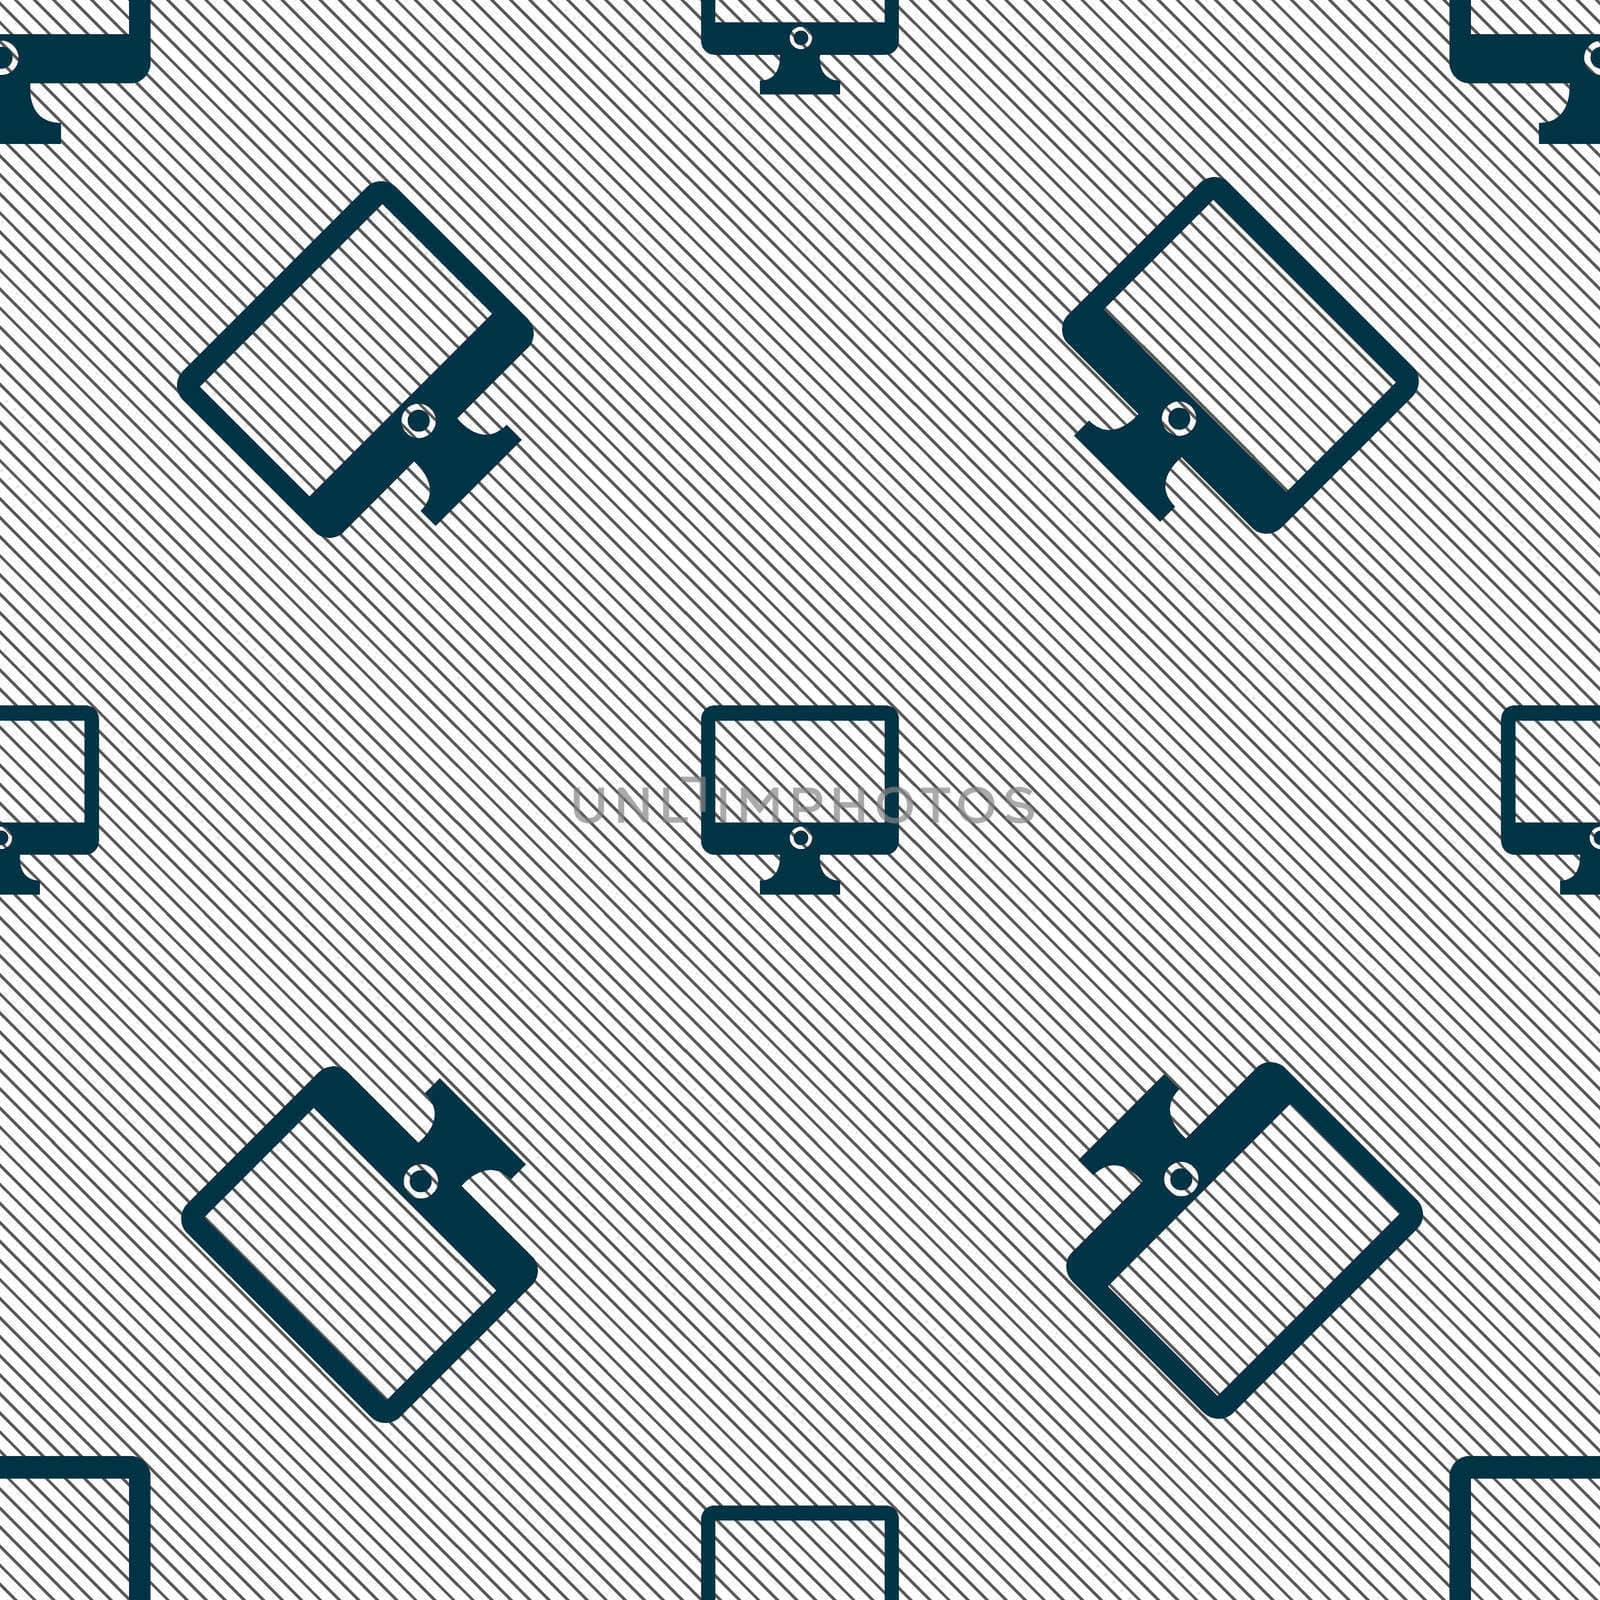 Computer widescreen monitor sign icon. Seamless pattern with geometric texture. illustration